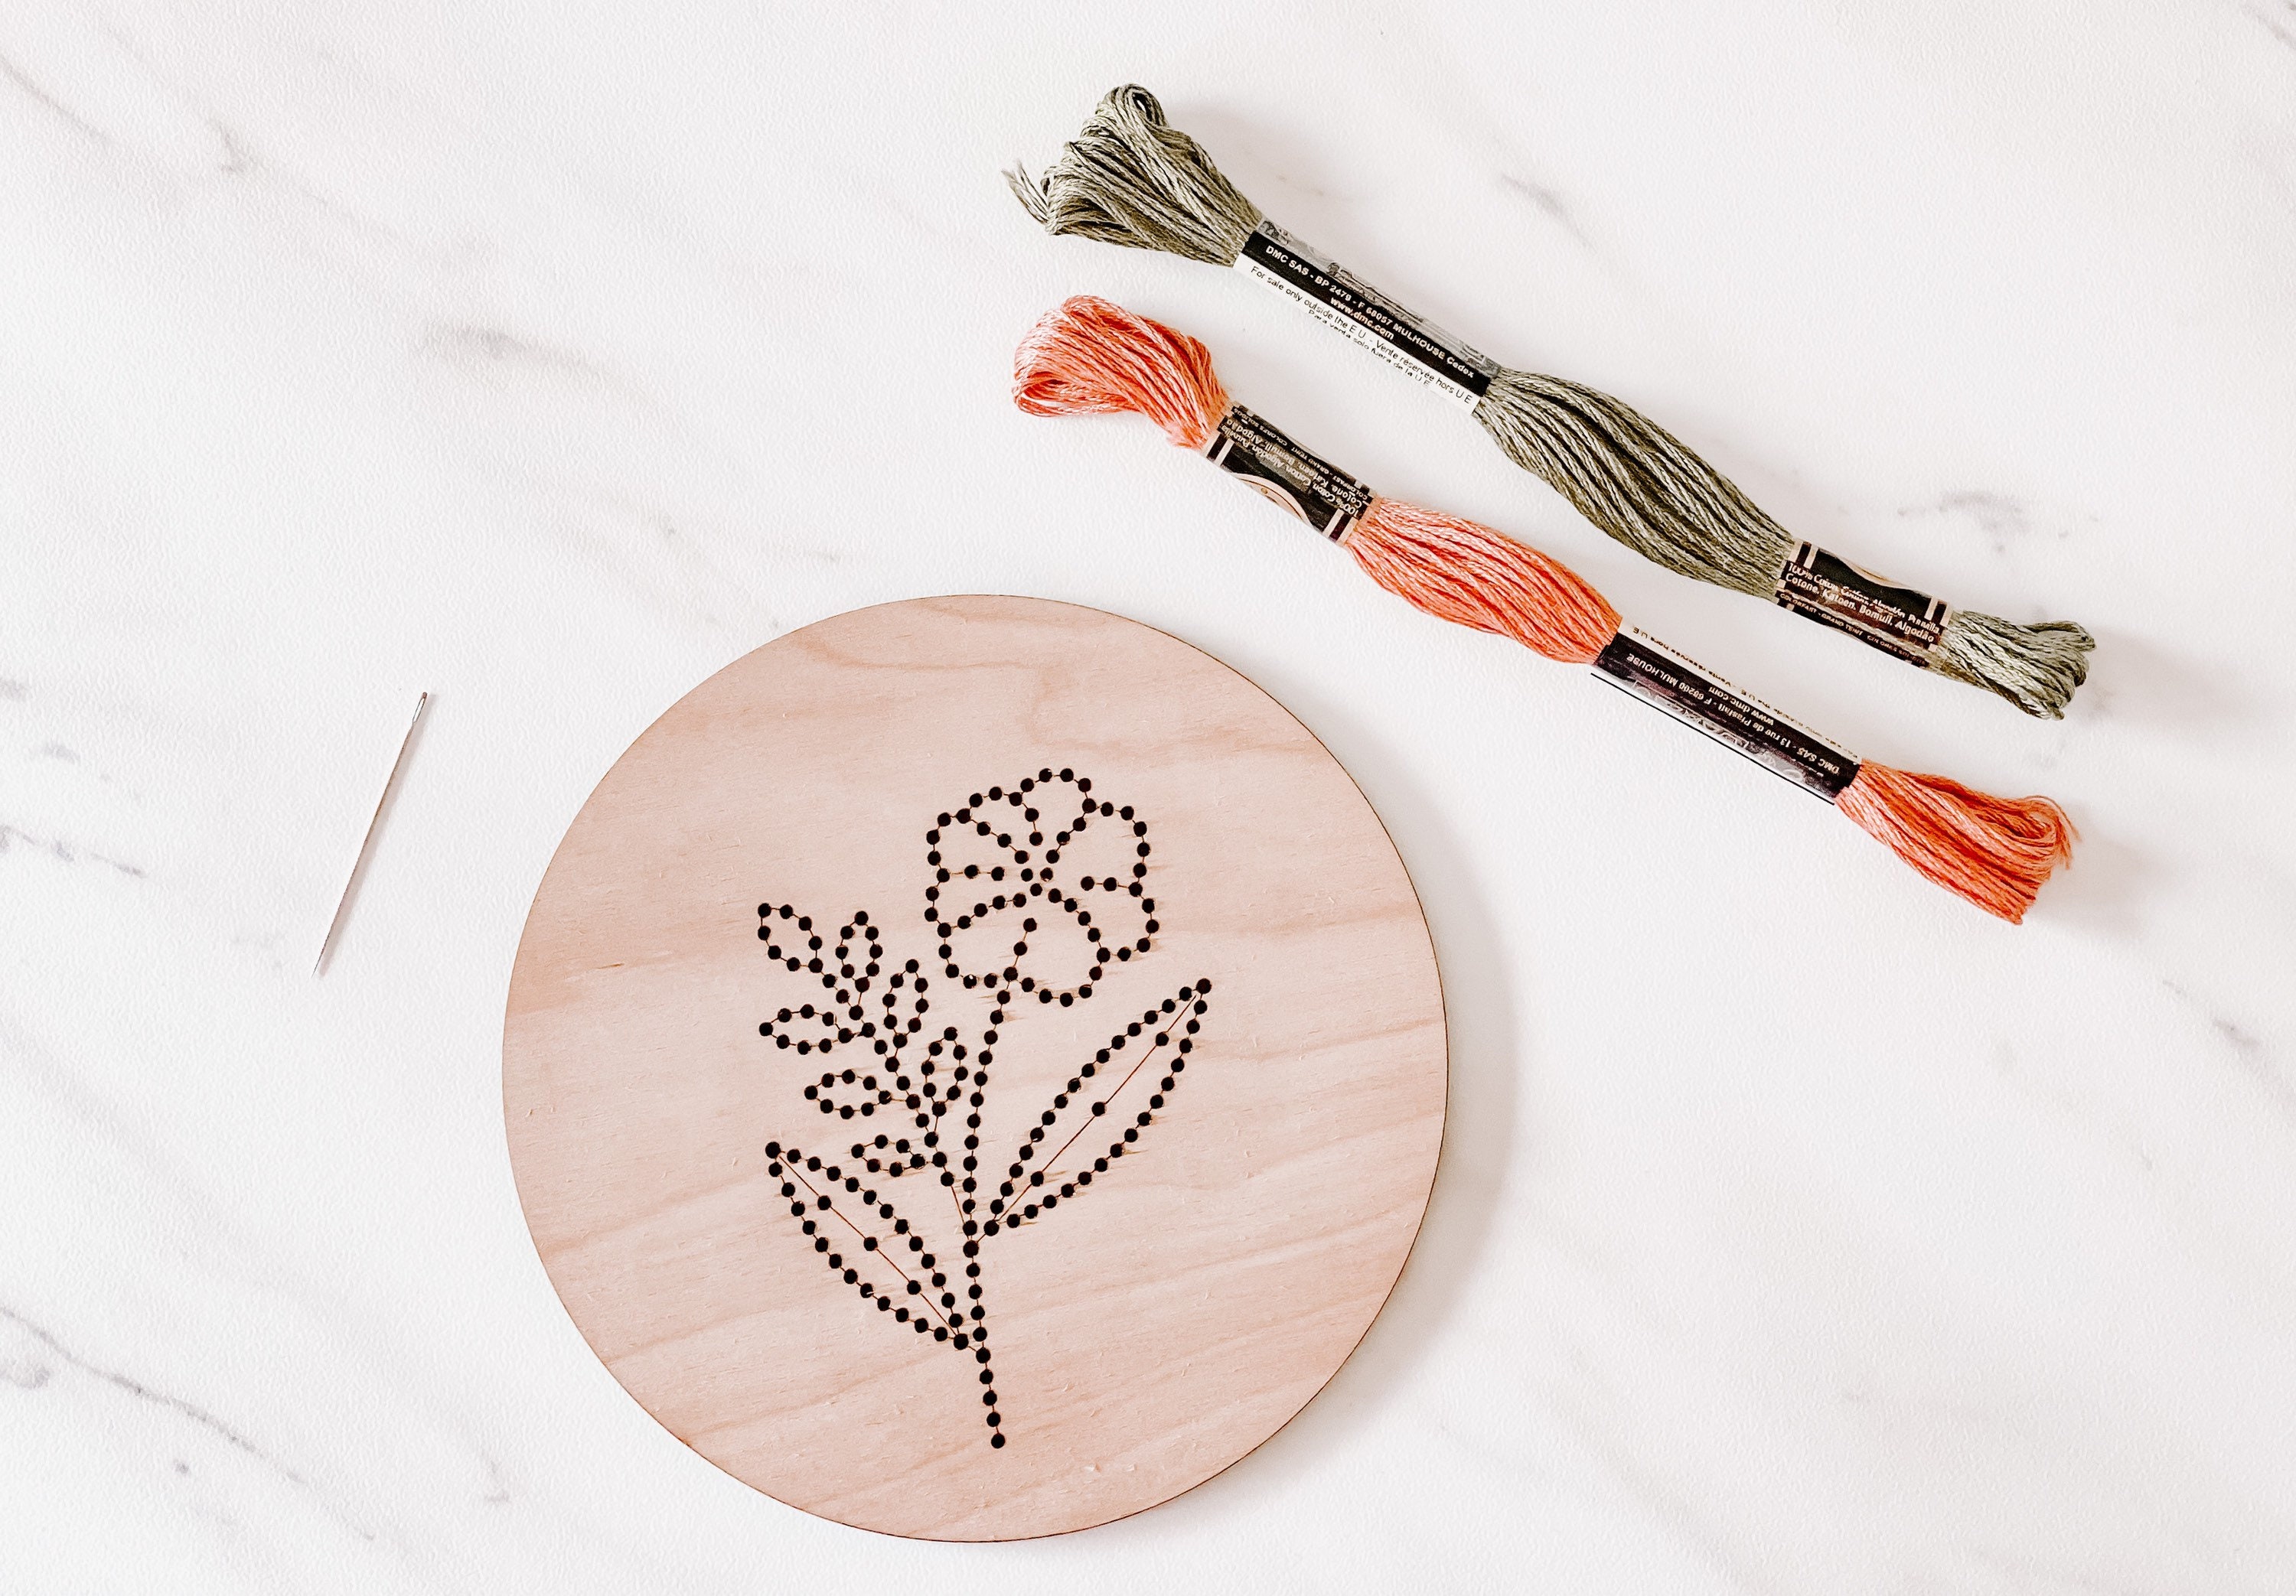 Floral Stems - Wood Embroidery Kit